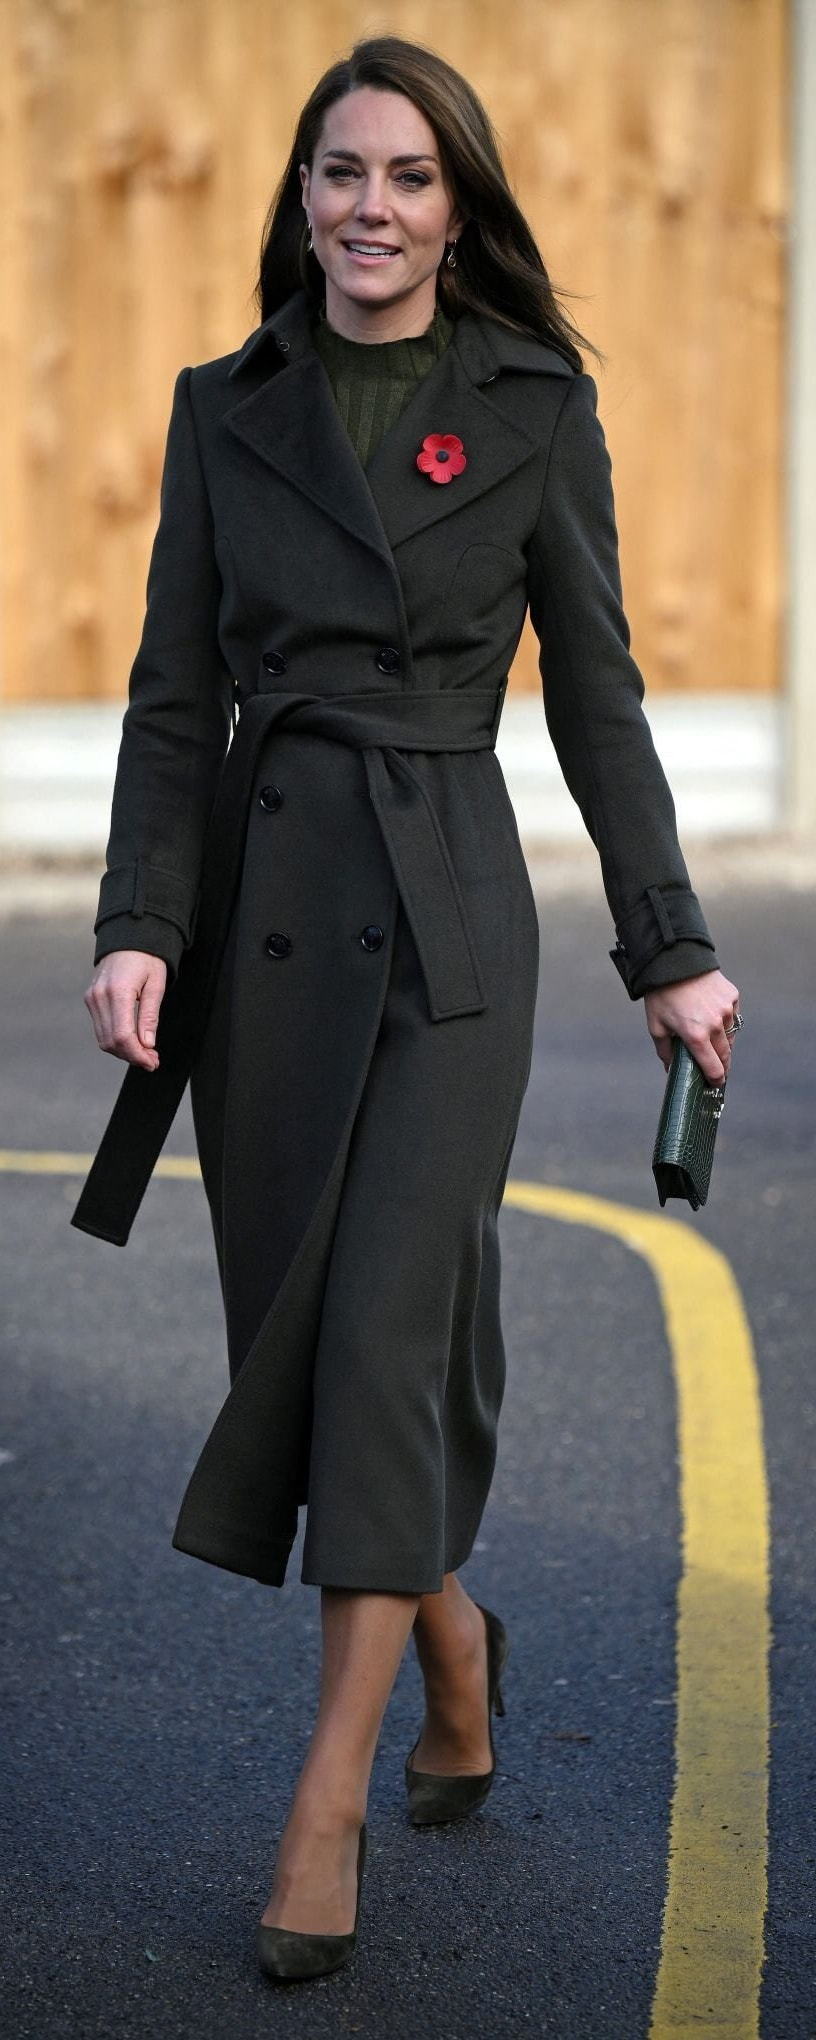 Hobbs Lori Wool-Cashmere Belted Coat in Olive as seen on Kate Middleton, Princess of Wales.